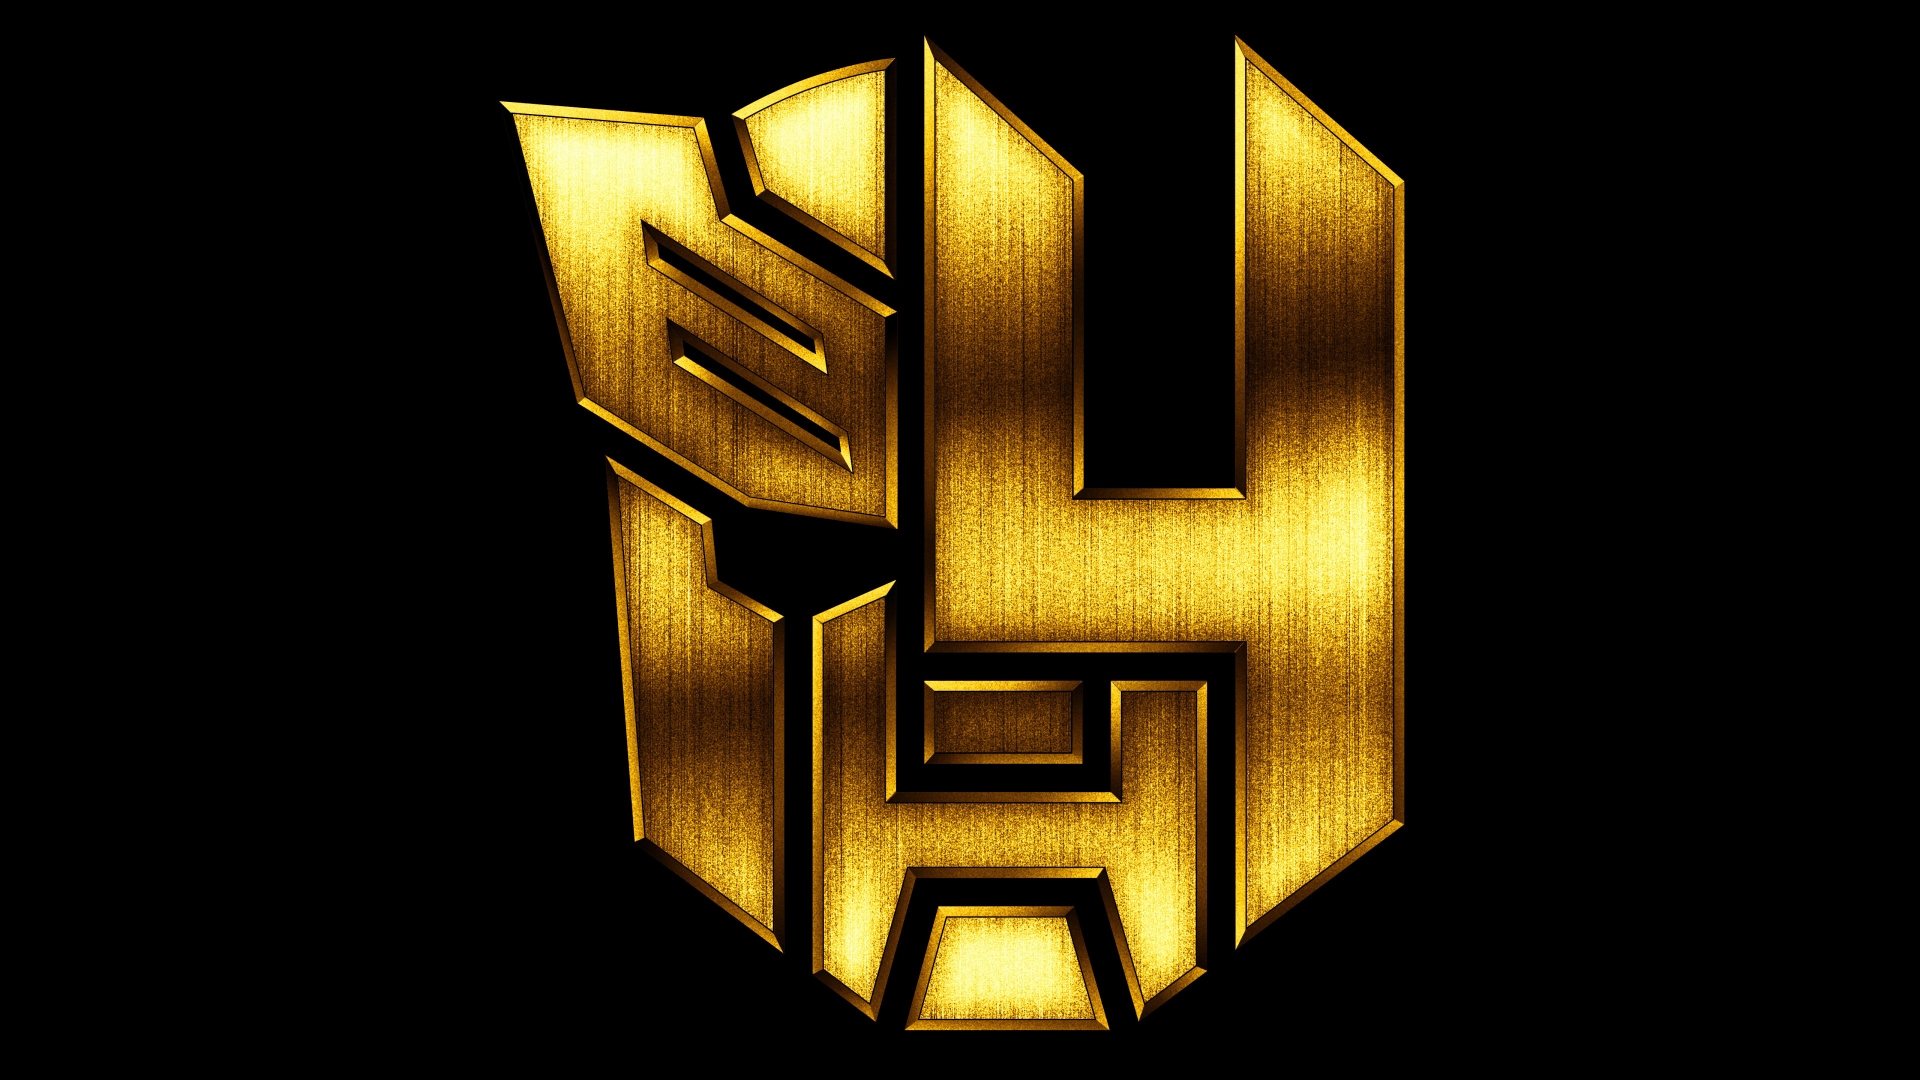 Transformers 4 Age of Extinction 2014 for 1920 x 1080 HDTV 1080p resolution